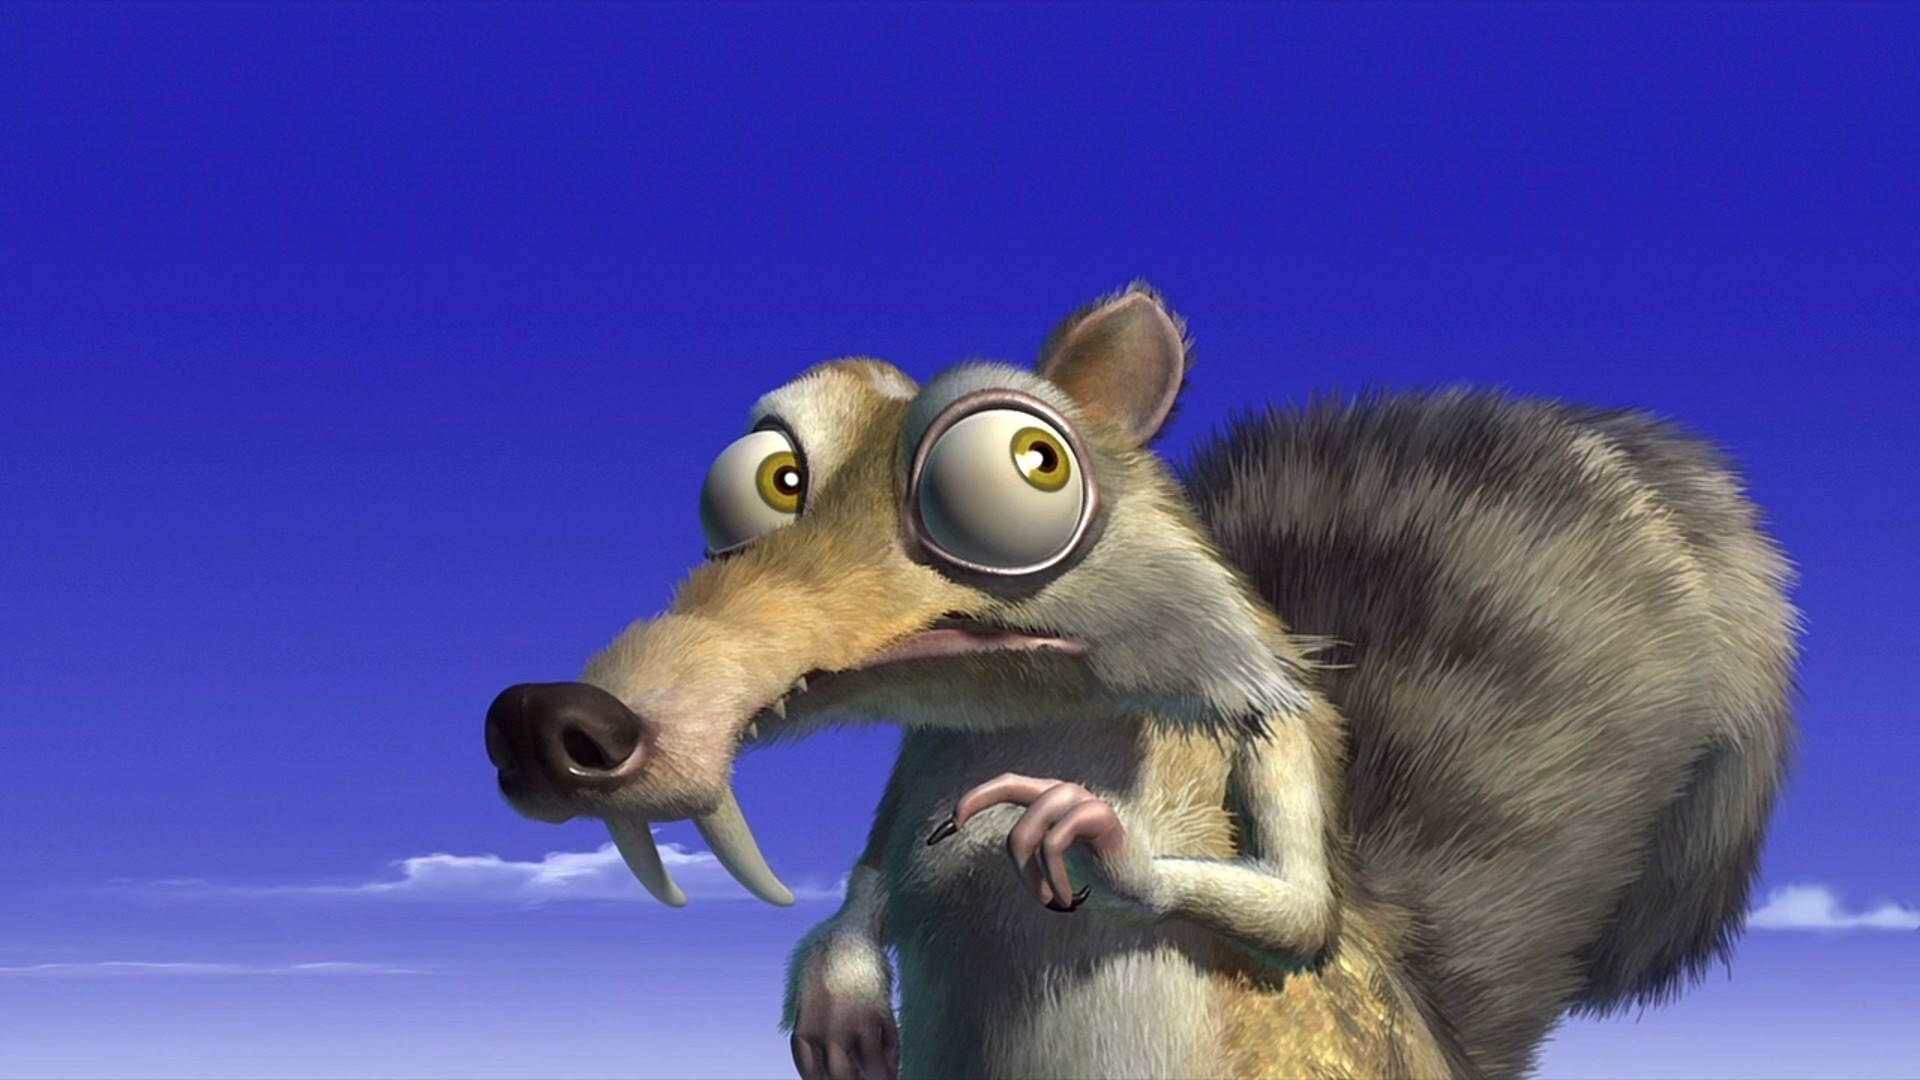 "Scrat, the iconic squirrel of Ice Age, with his never-ending quest for an acorn, frozen in time." Wallpaper